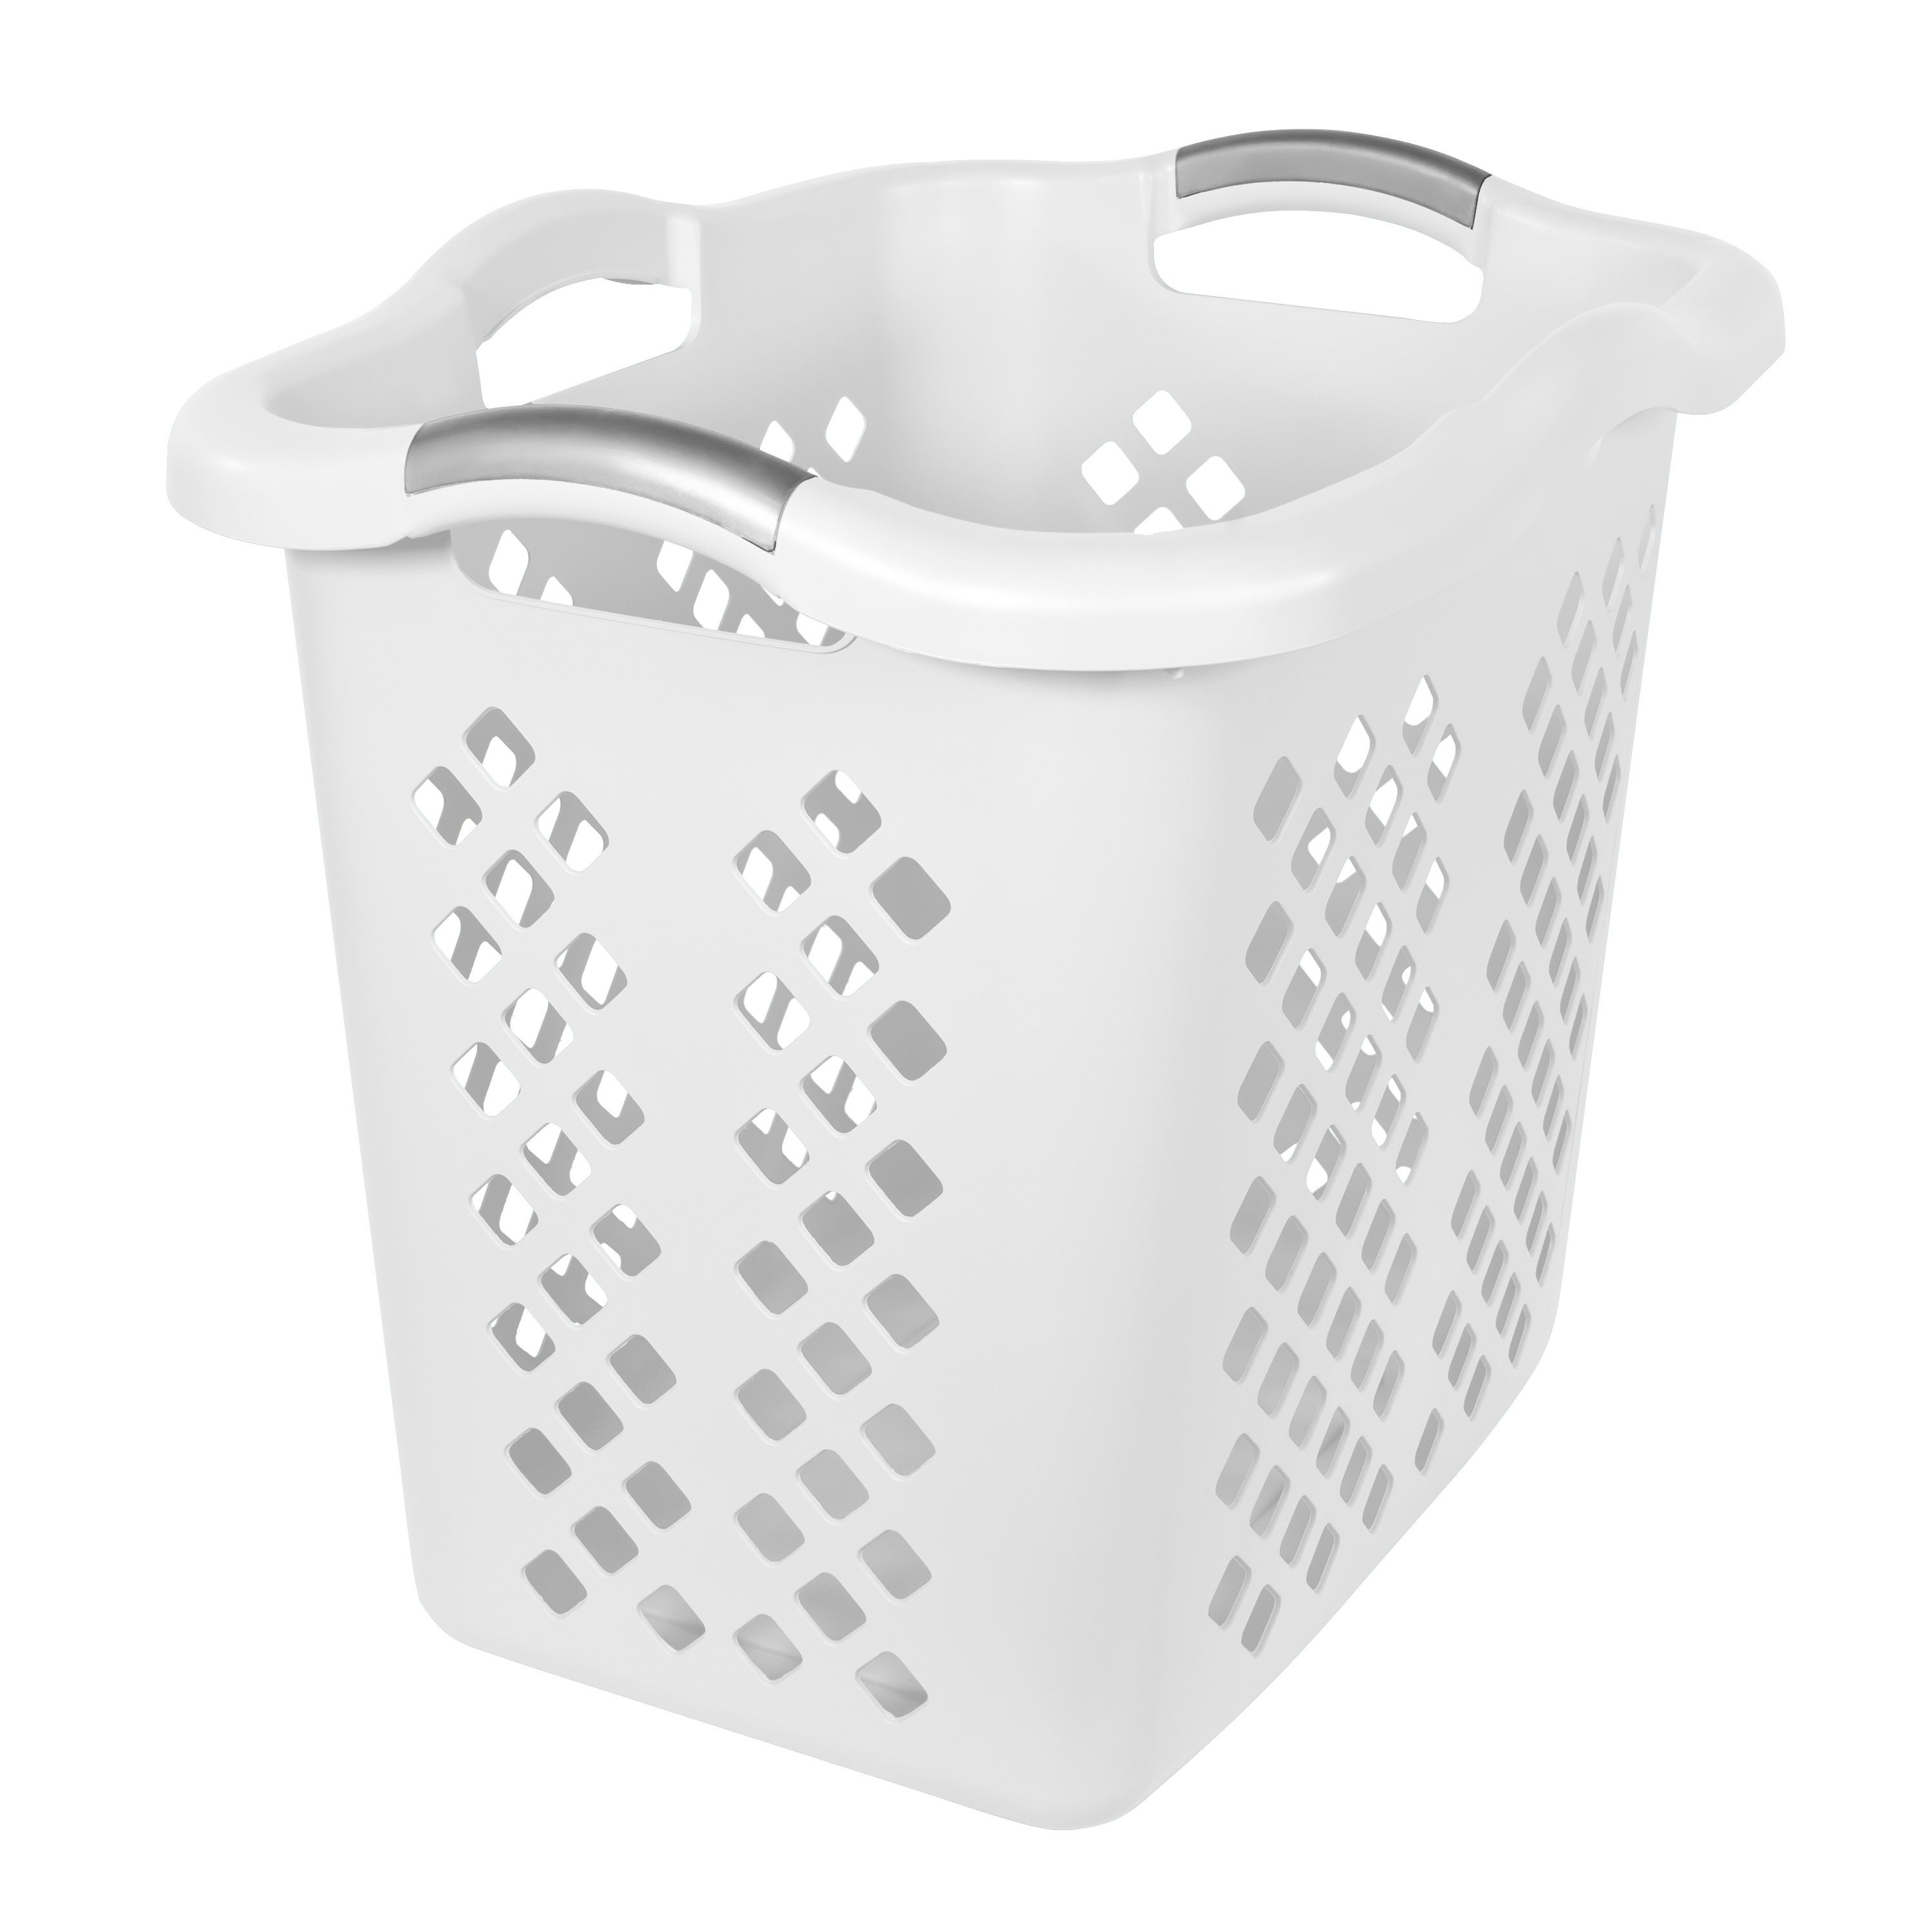  CleverMade Laundry Hamper; X-Frame Laundry Basket with  Removable Bag; Stylish Room Decor for Home, Apartment, or Dorm Room : Home  & Kitchen